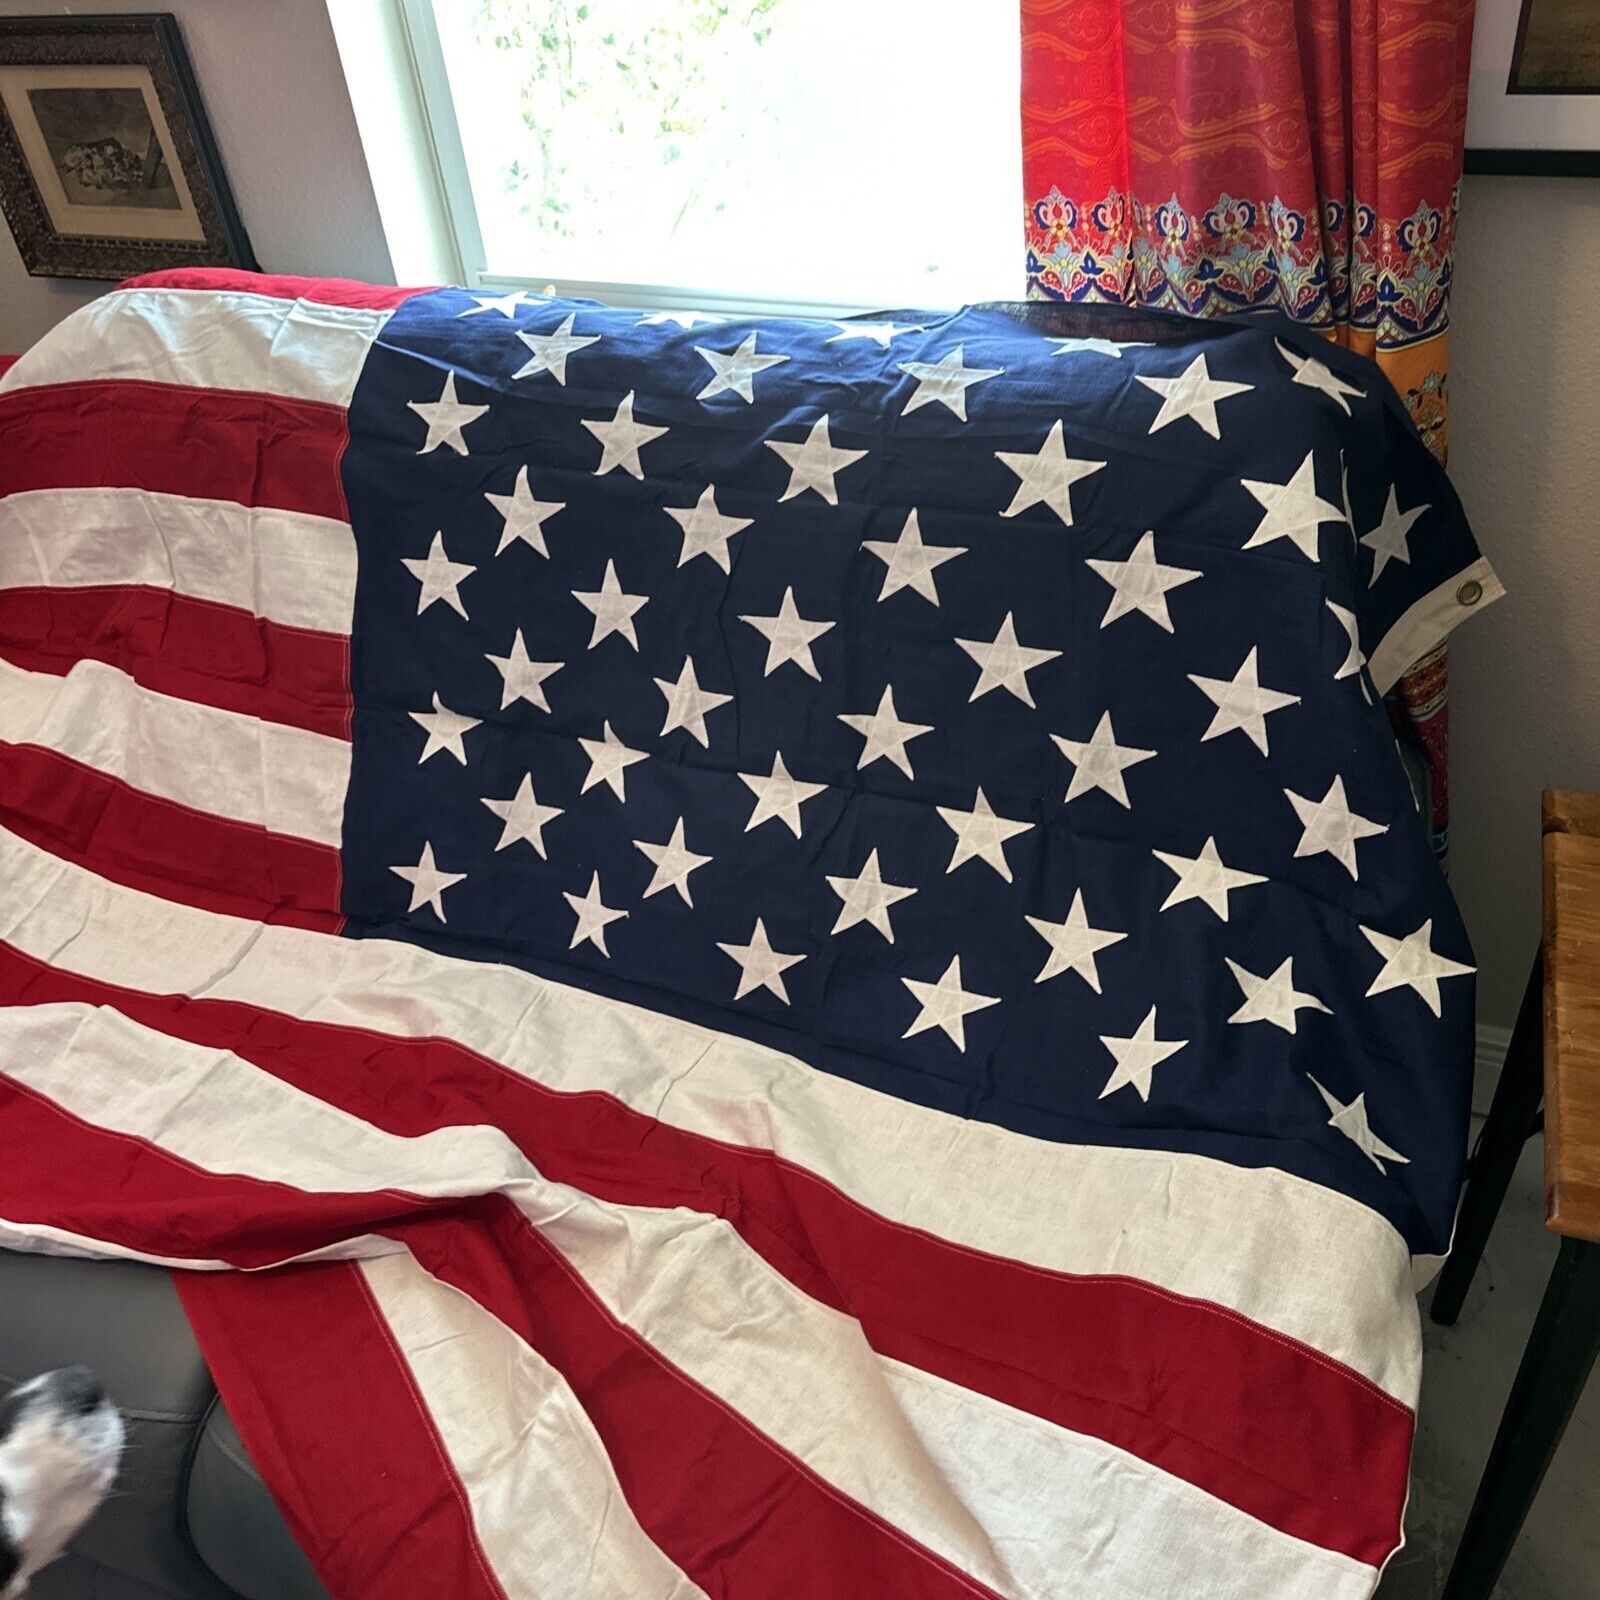 VALLEY FORGE AMERICAN FLAG 100% COTTON 50 SEWN STARS 5' X 9 1/2’